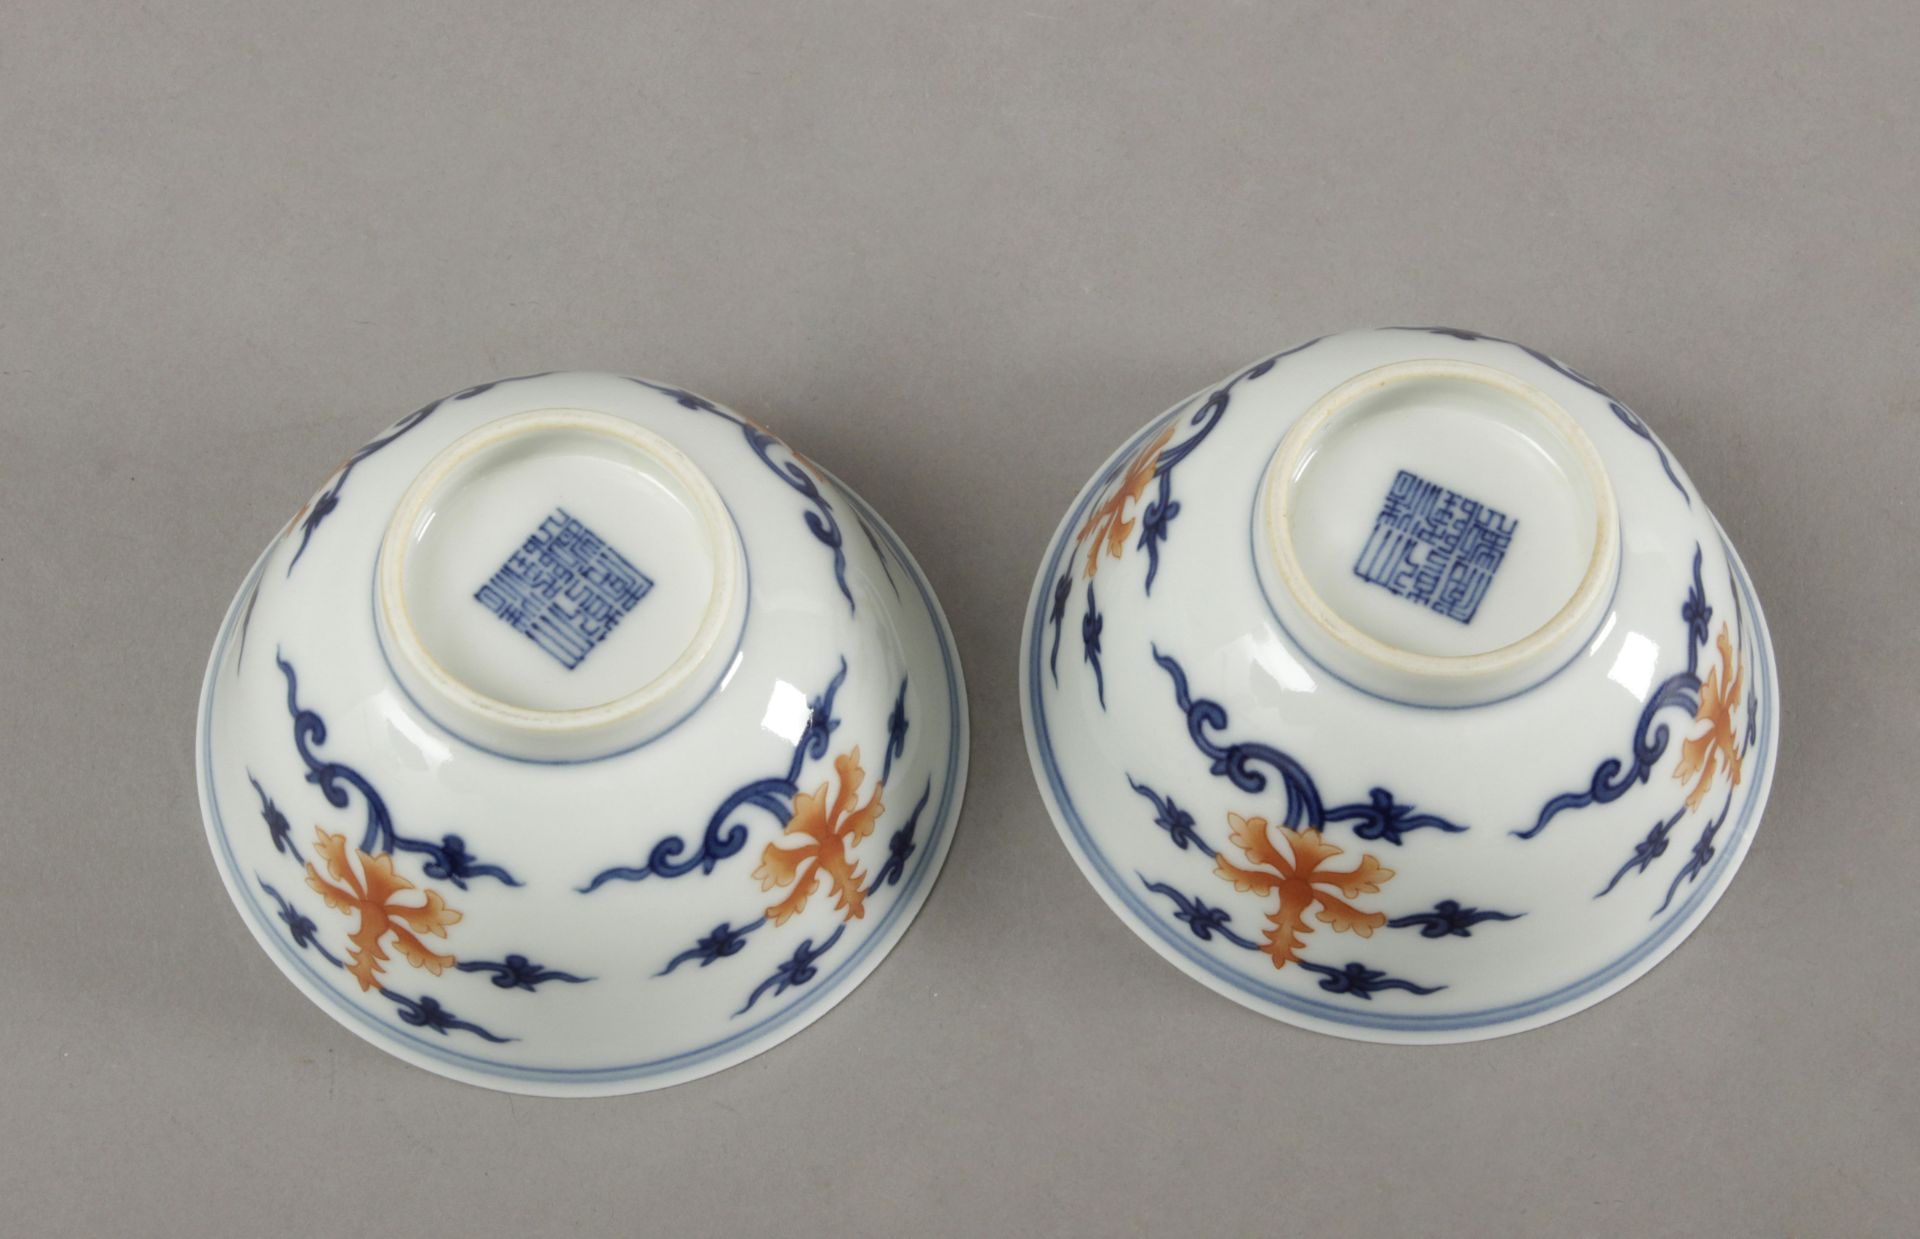 Pair of 20th century Chinese tea cups in blue and white porcelain - Image 4 of 4